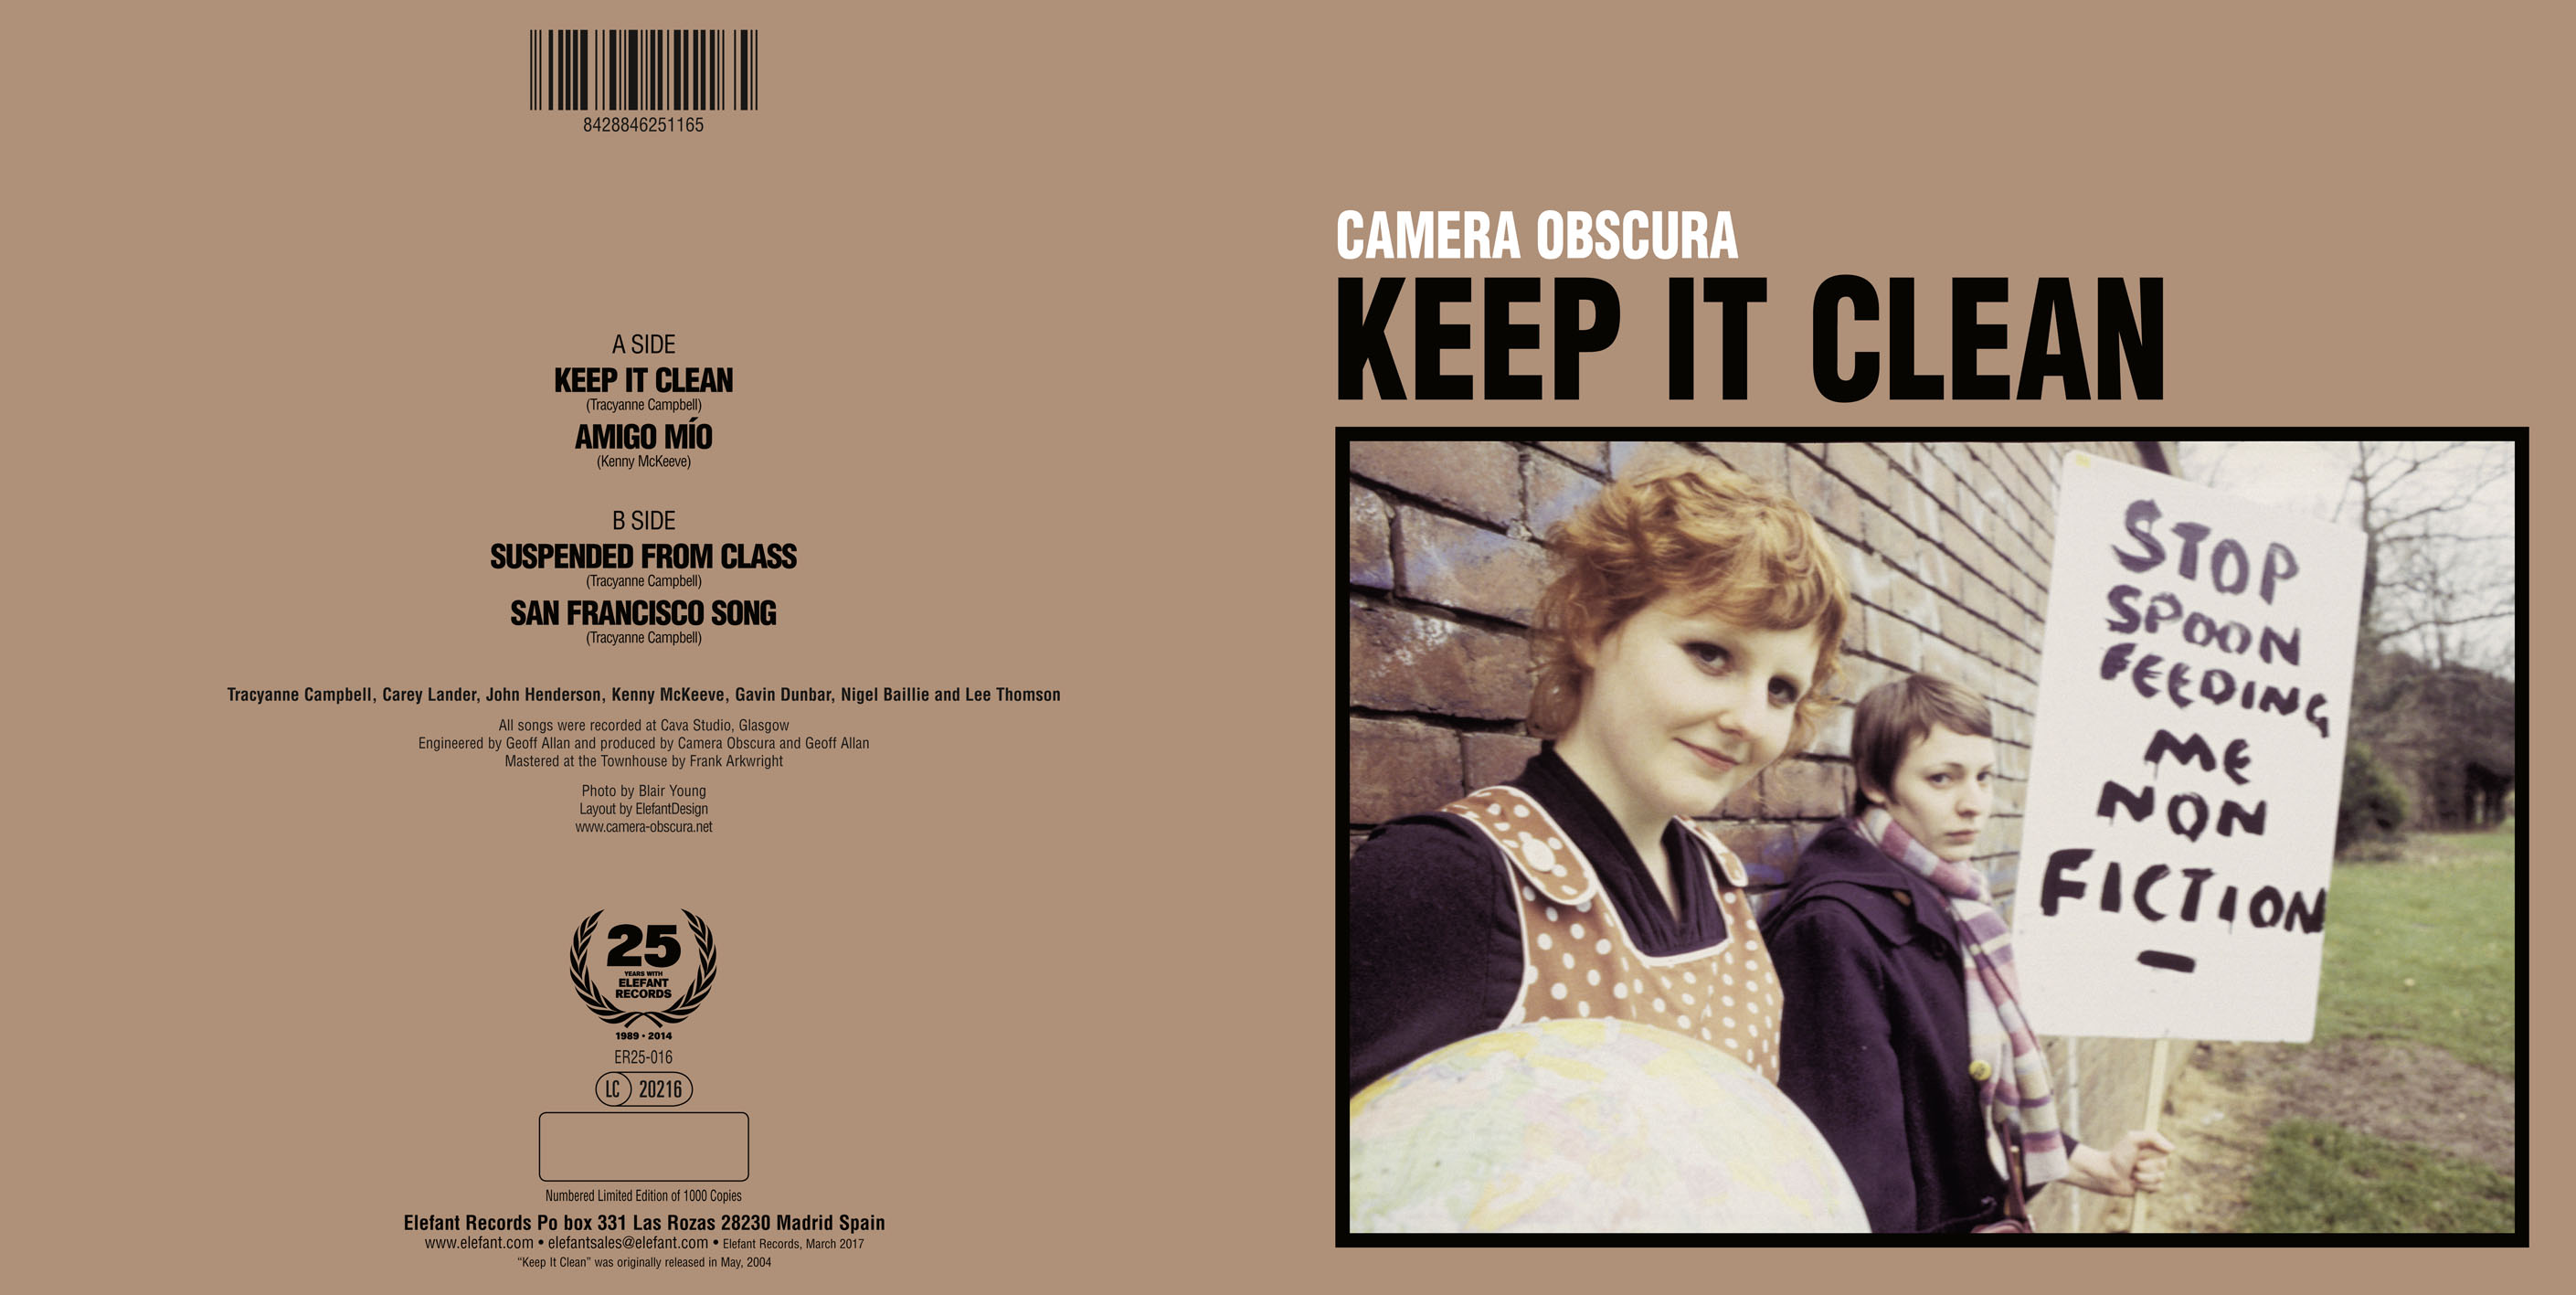 Camera Obscura "Keep It Clean" Single 7"